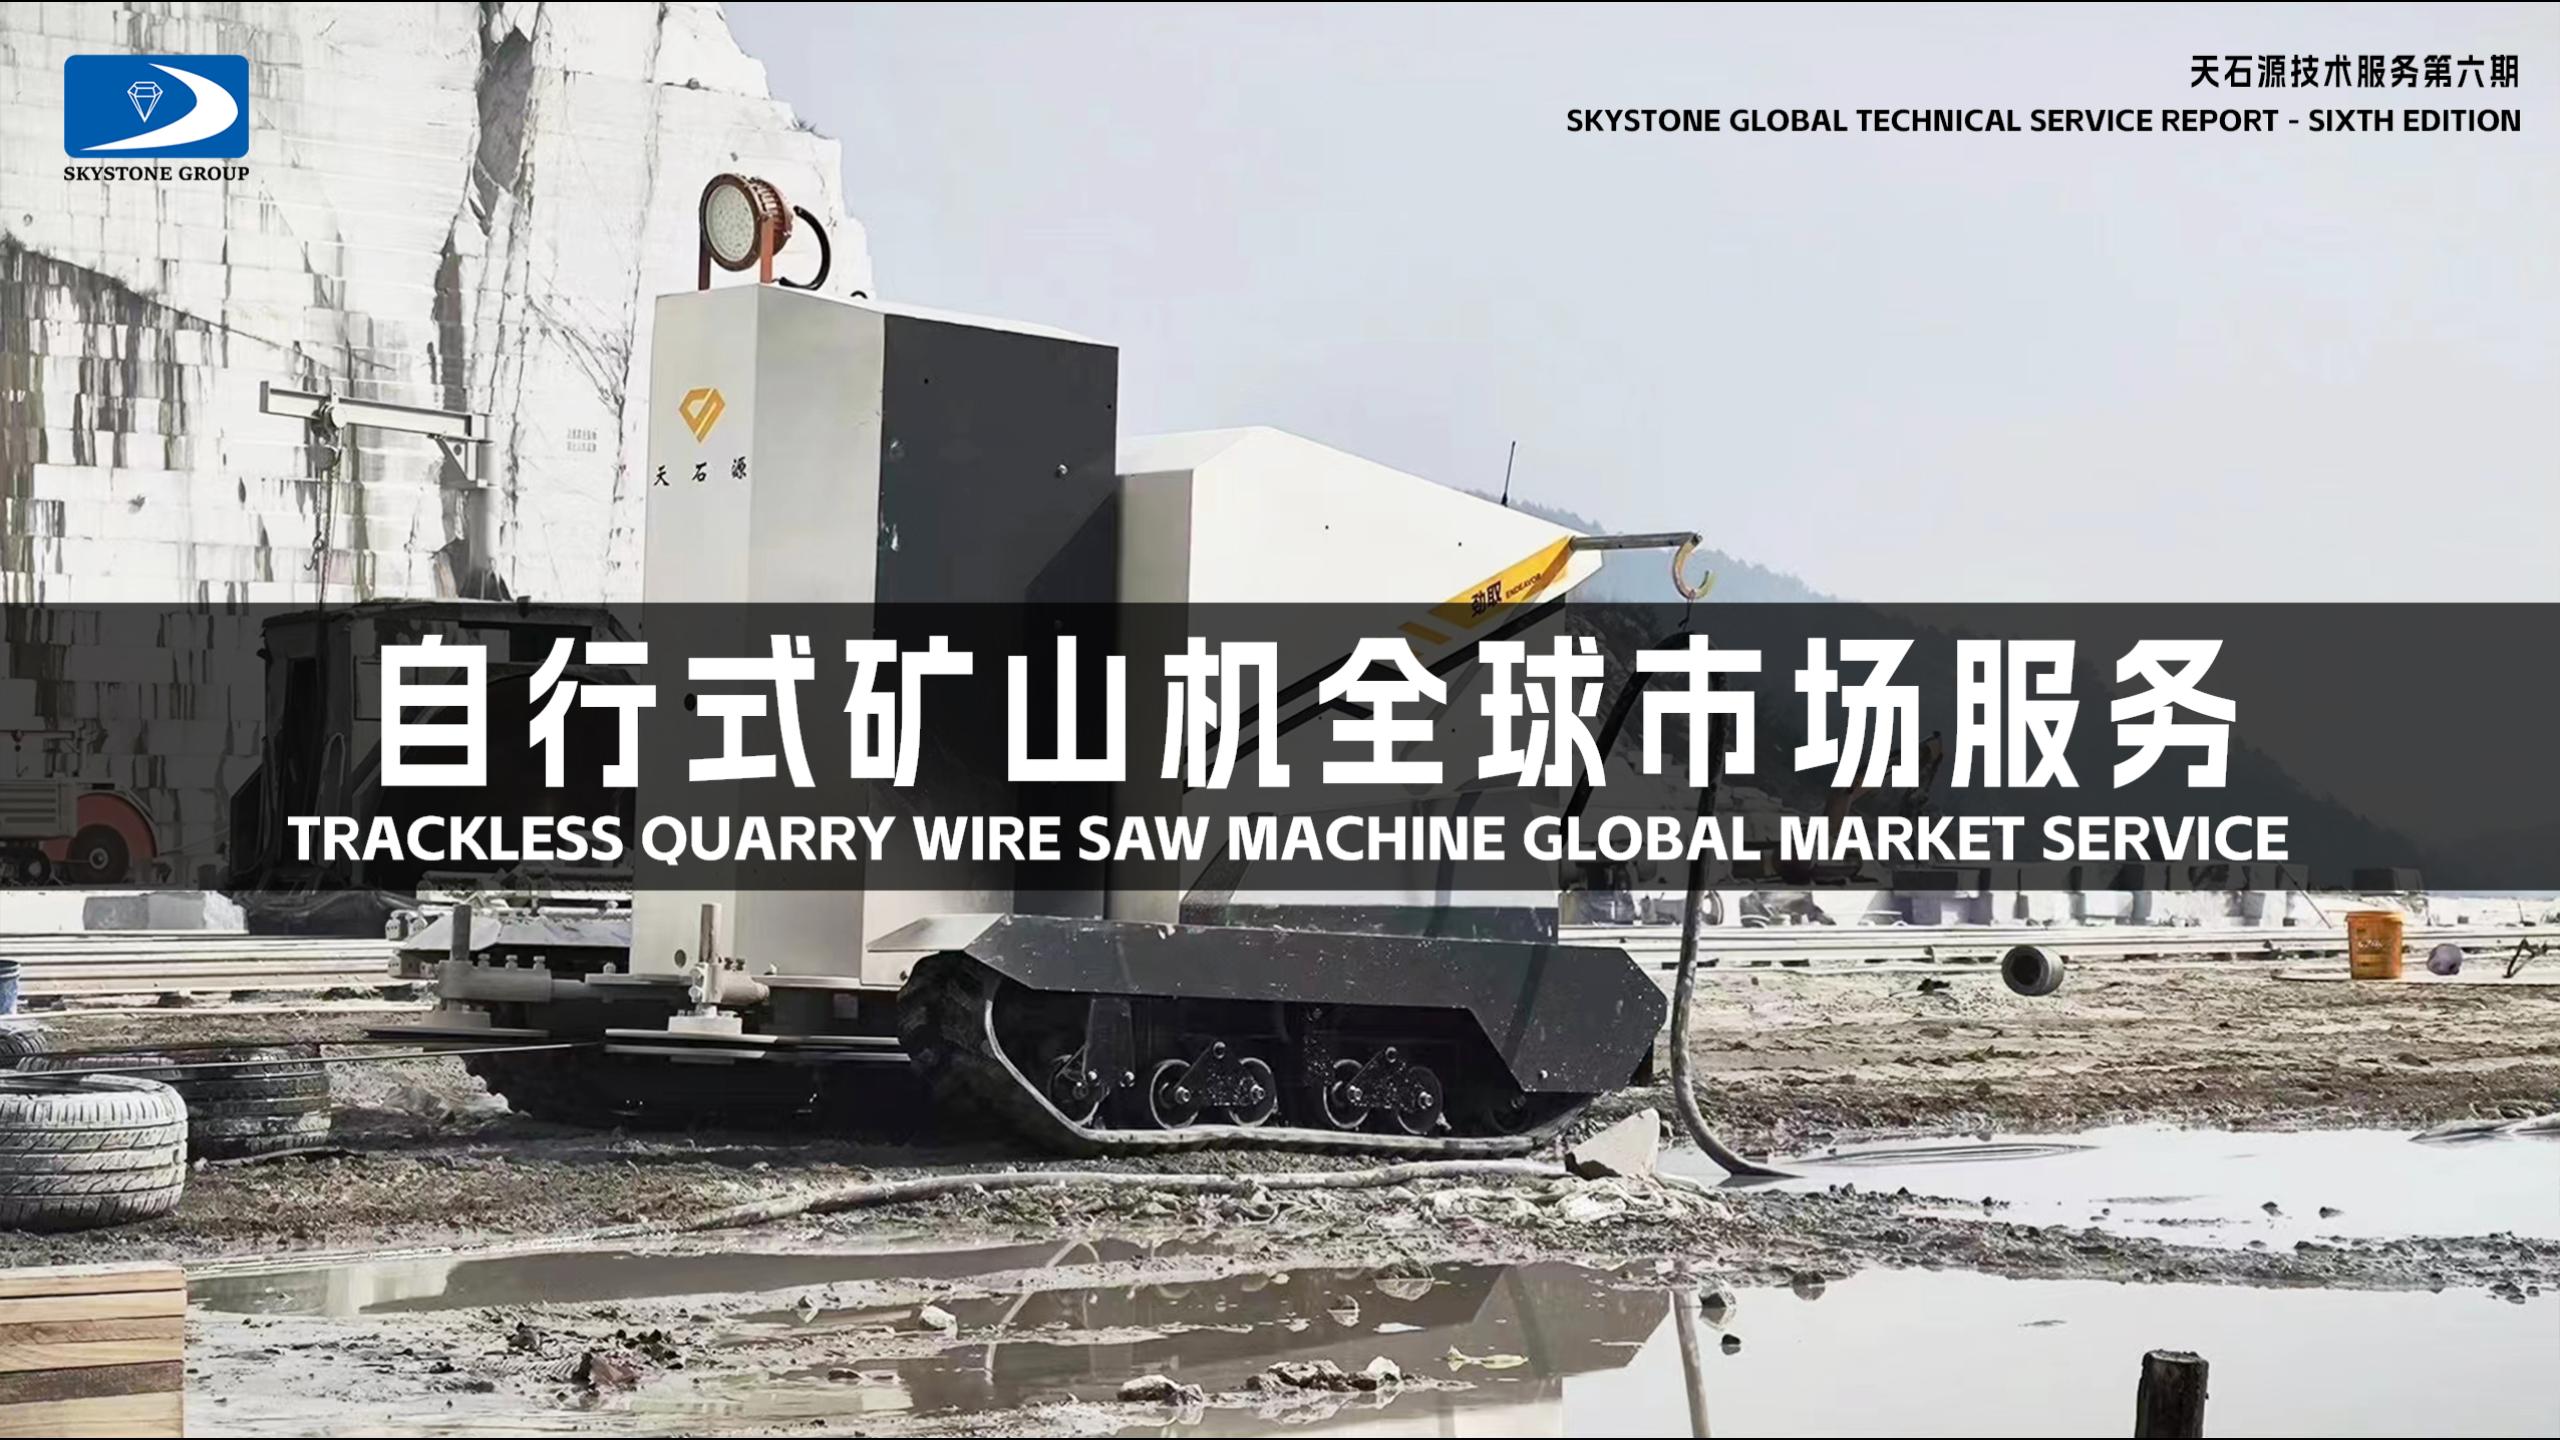 Skystone Group,Trackless Quarry Wire Saw Machine,Skystone Global Technical Service Report - Sixth Edition